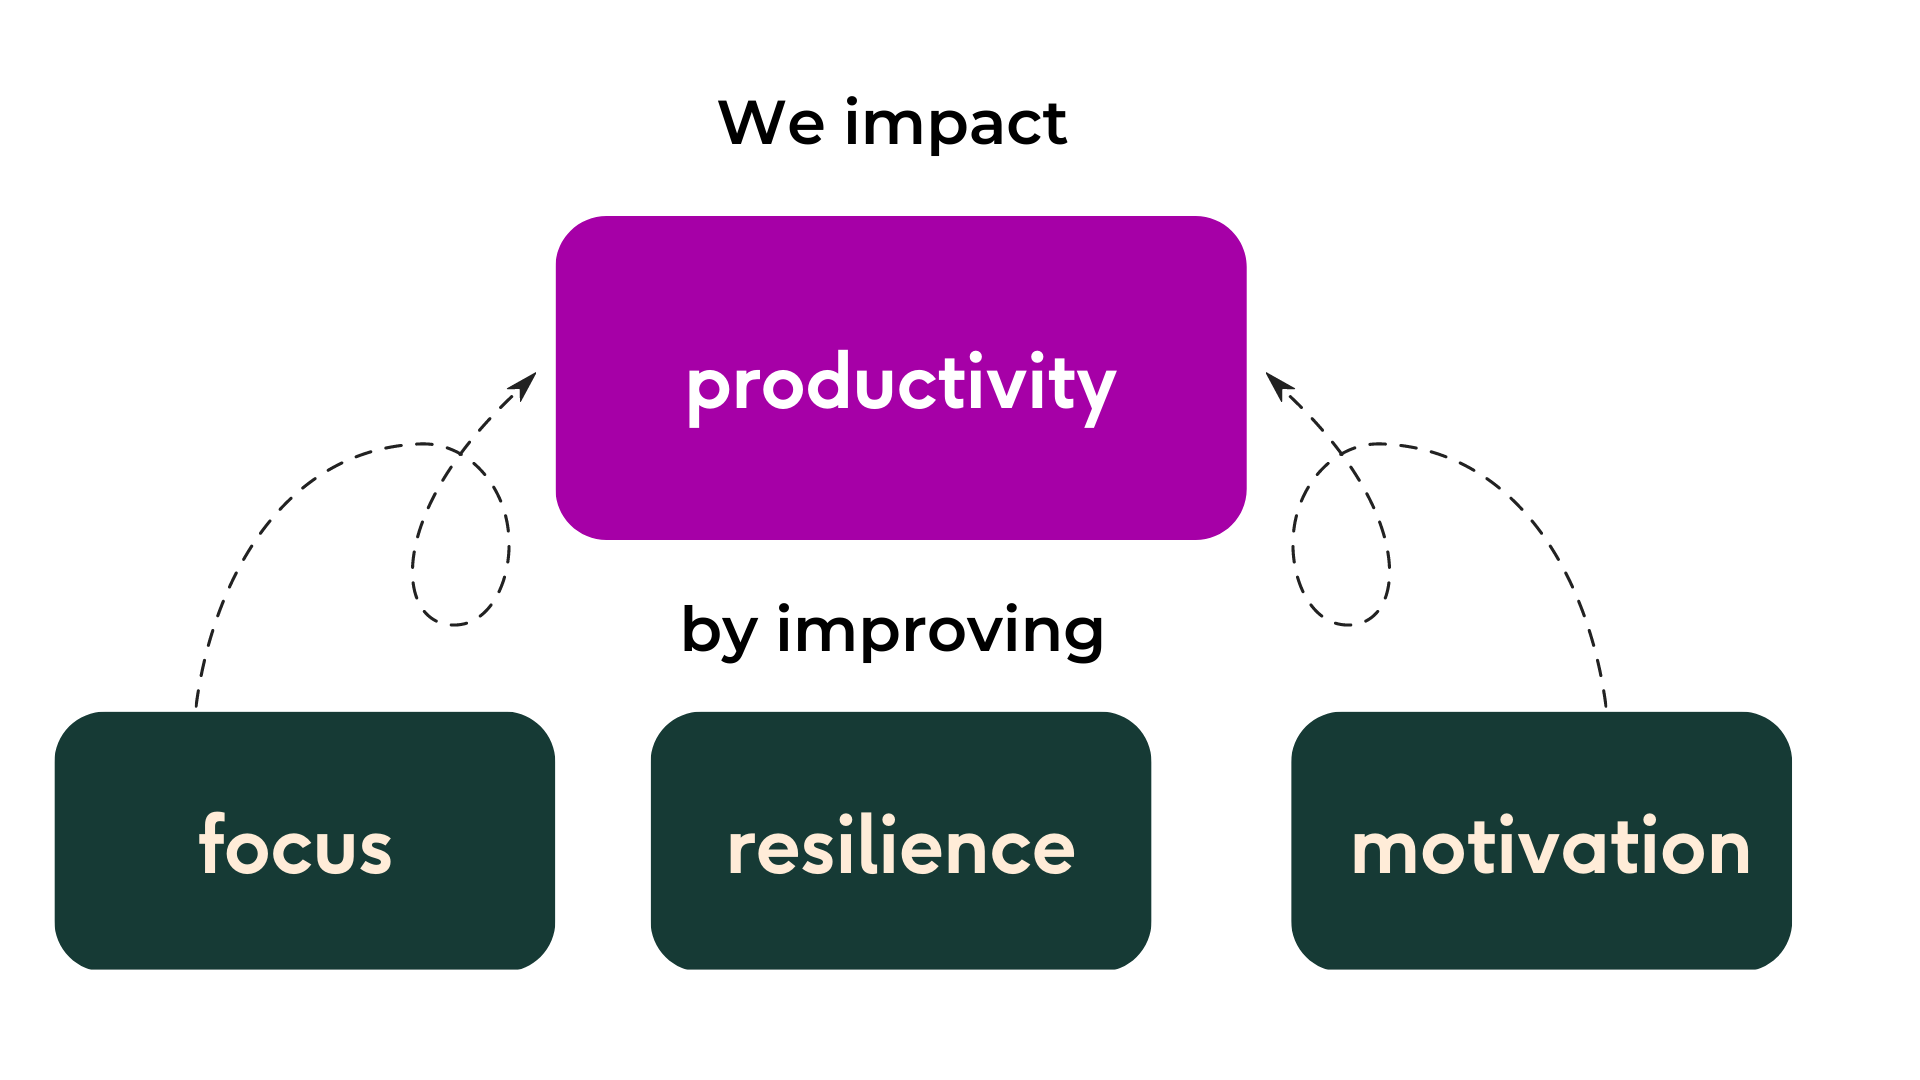 We impact productivity by improving focus, resilience, and motivation